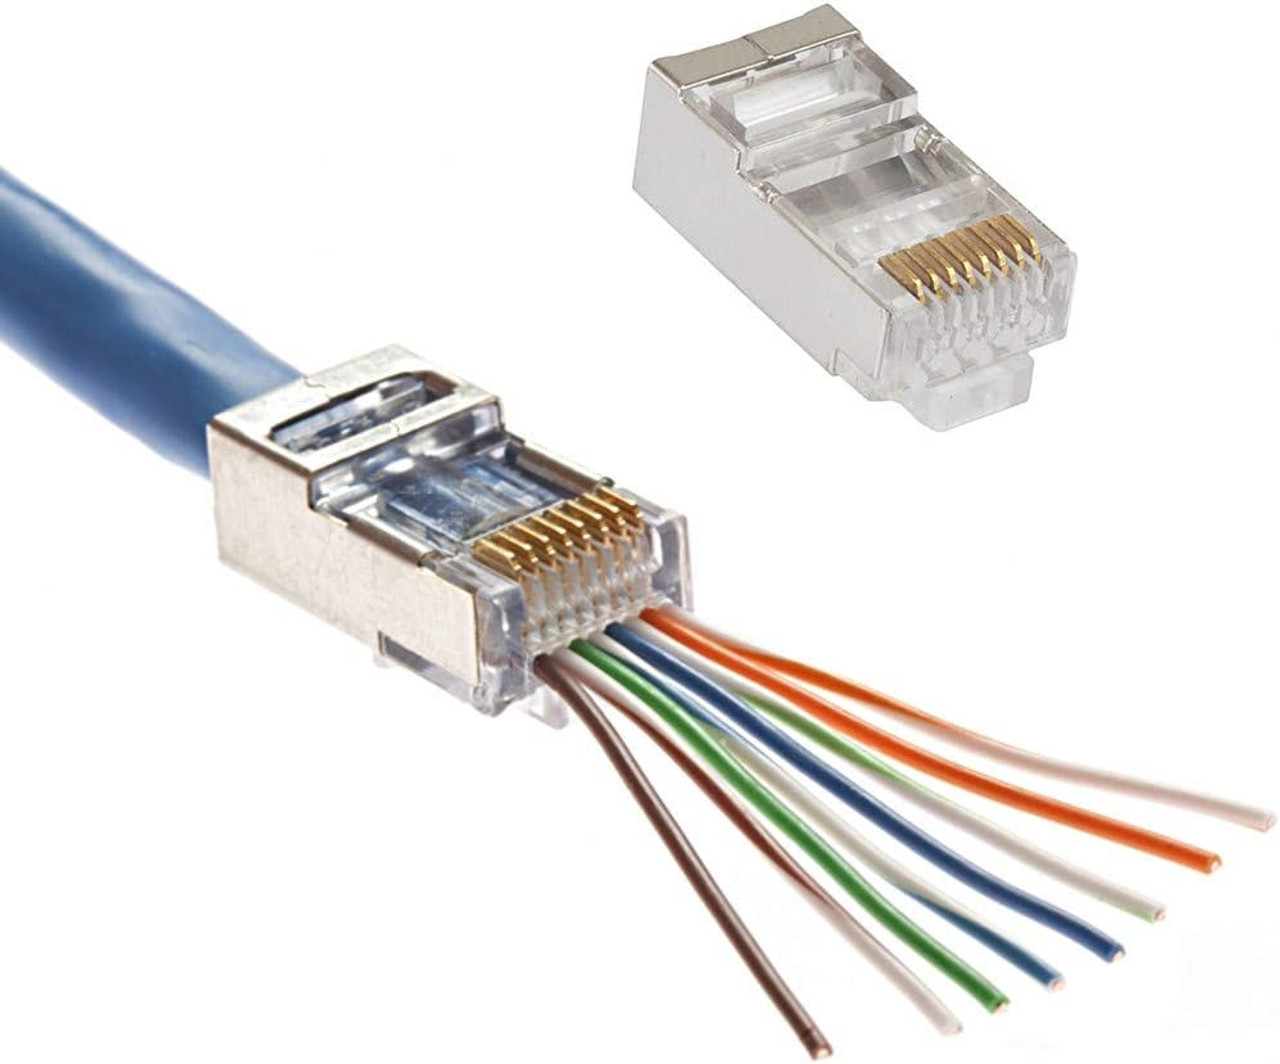 CAT6 Shielded RJ45 Pass Through Modular Plug Cable Connector End